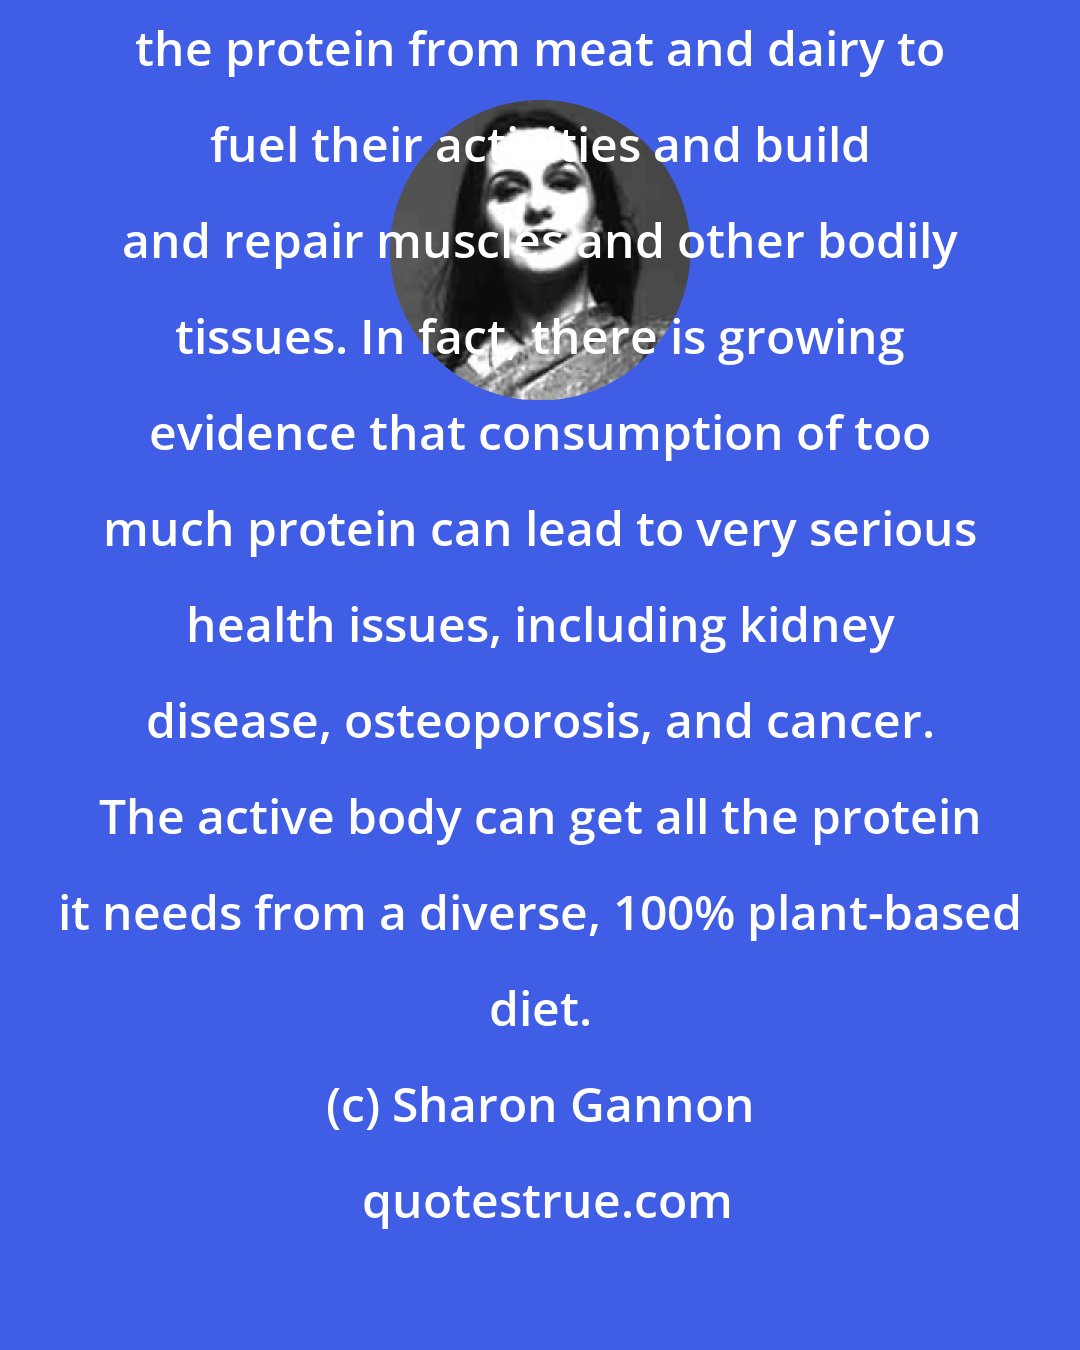 Sharon Gannon: It's a common myth that athletes and other highly active people need the protein from meat and dairy to fuel their activities and build and repair muscles and other bodily tissues. In fact, there is growing evidence that consumption of too much protein can lead to very serious health issues, including kidney disease, osteoporosis, and cancer. The active body can get all the protein it needs from a diverse, 100% plant-based diet.